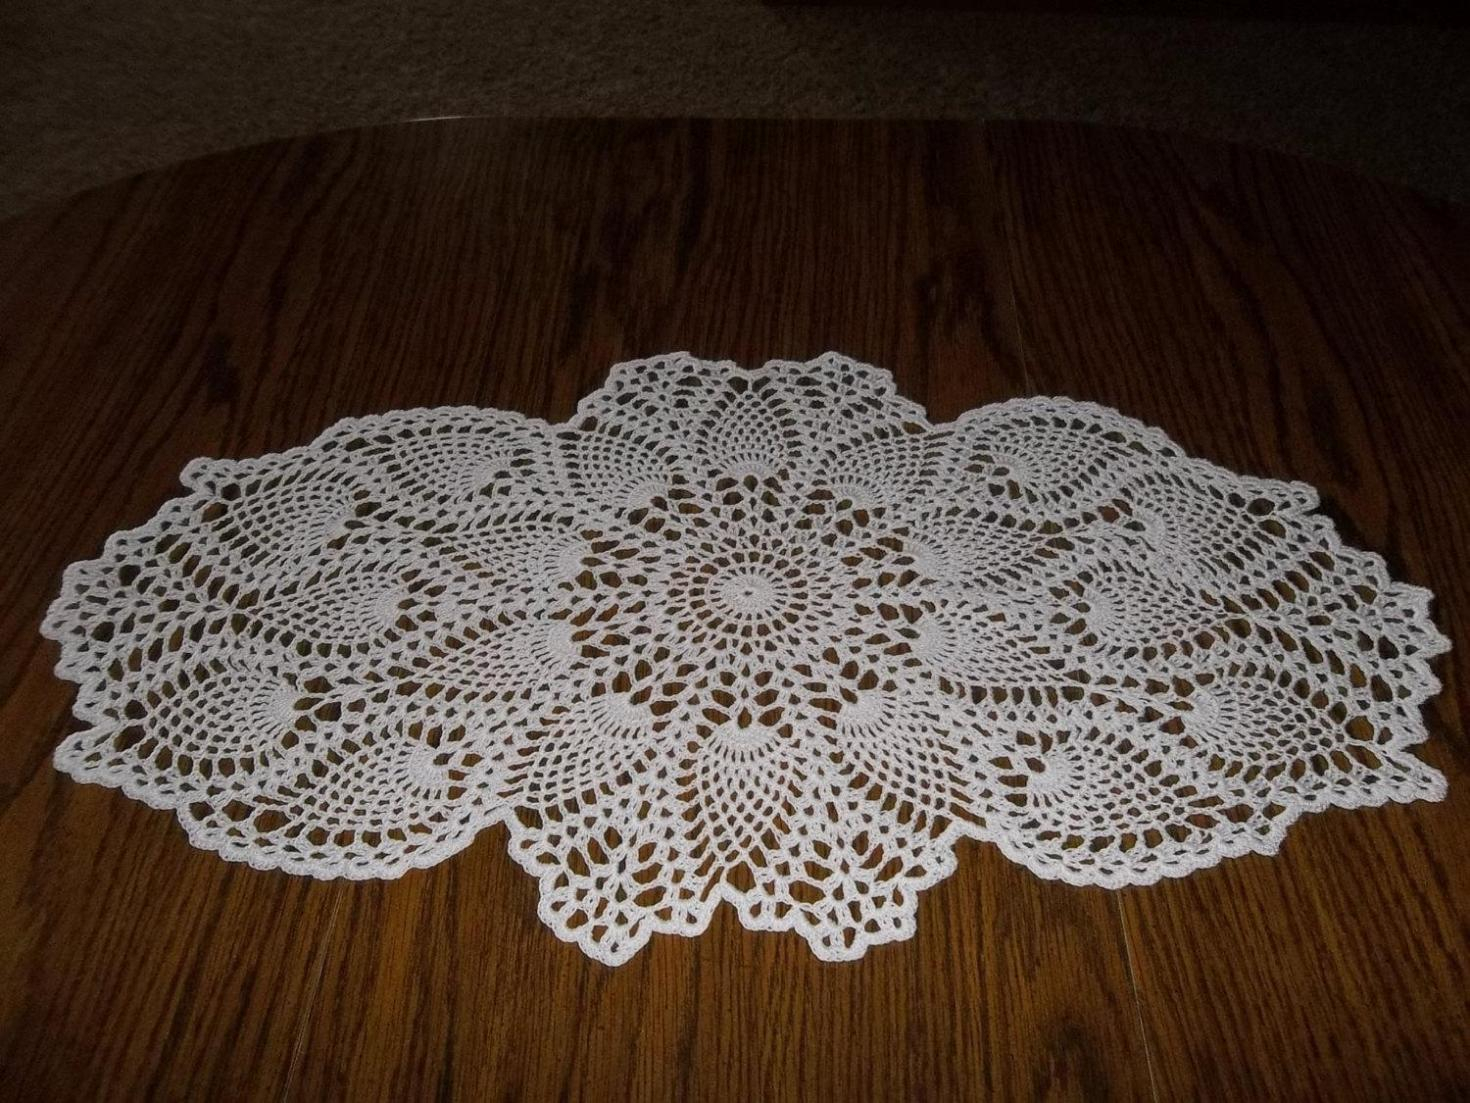 Crochet Table Runner Patterns Just For You 17 Crochet Table Runner Patterns For Beginners